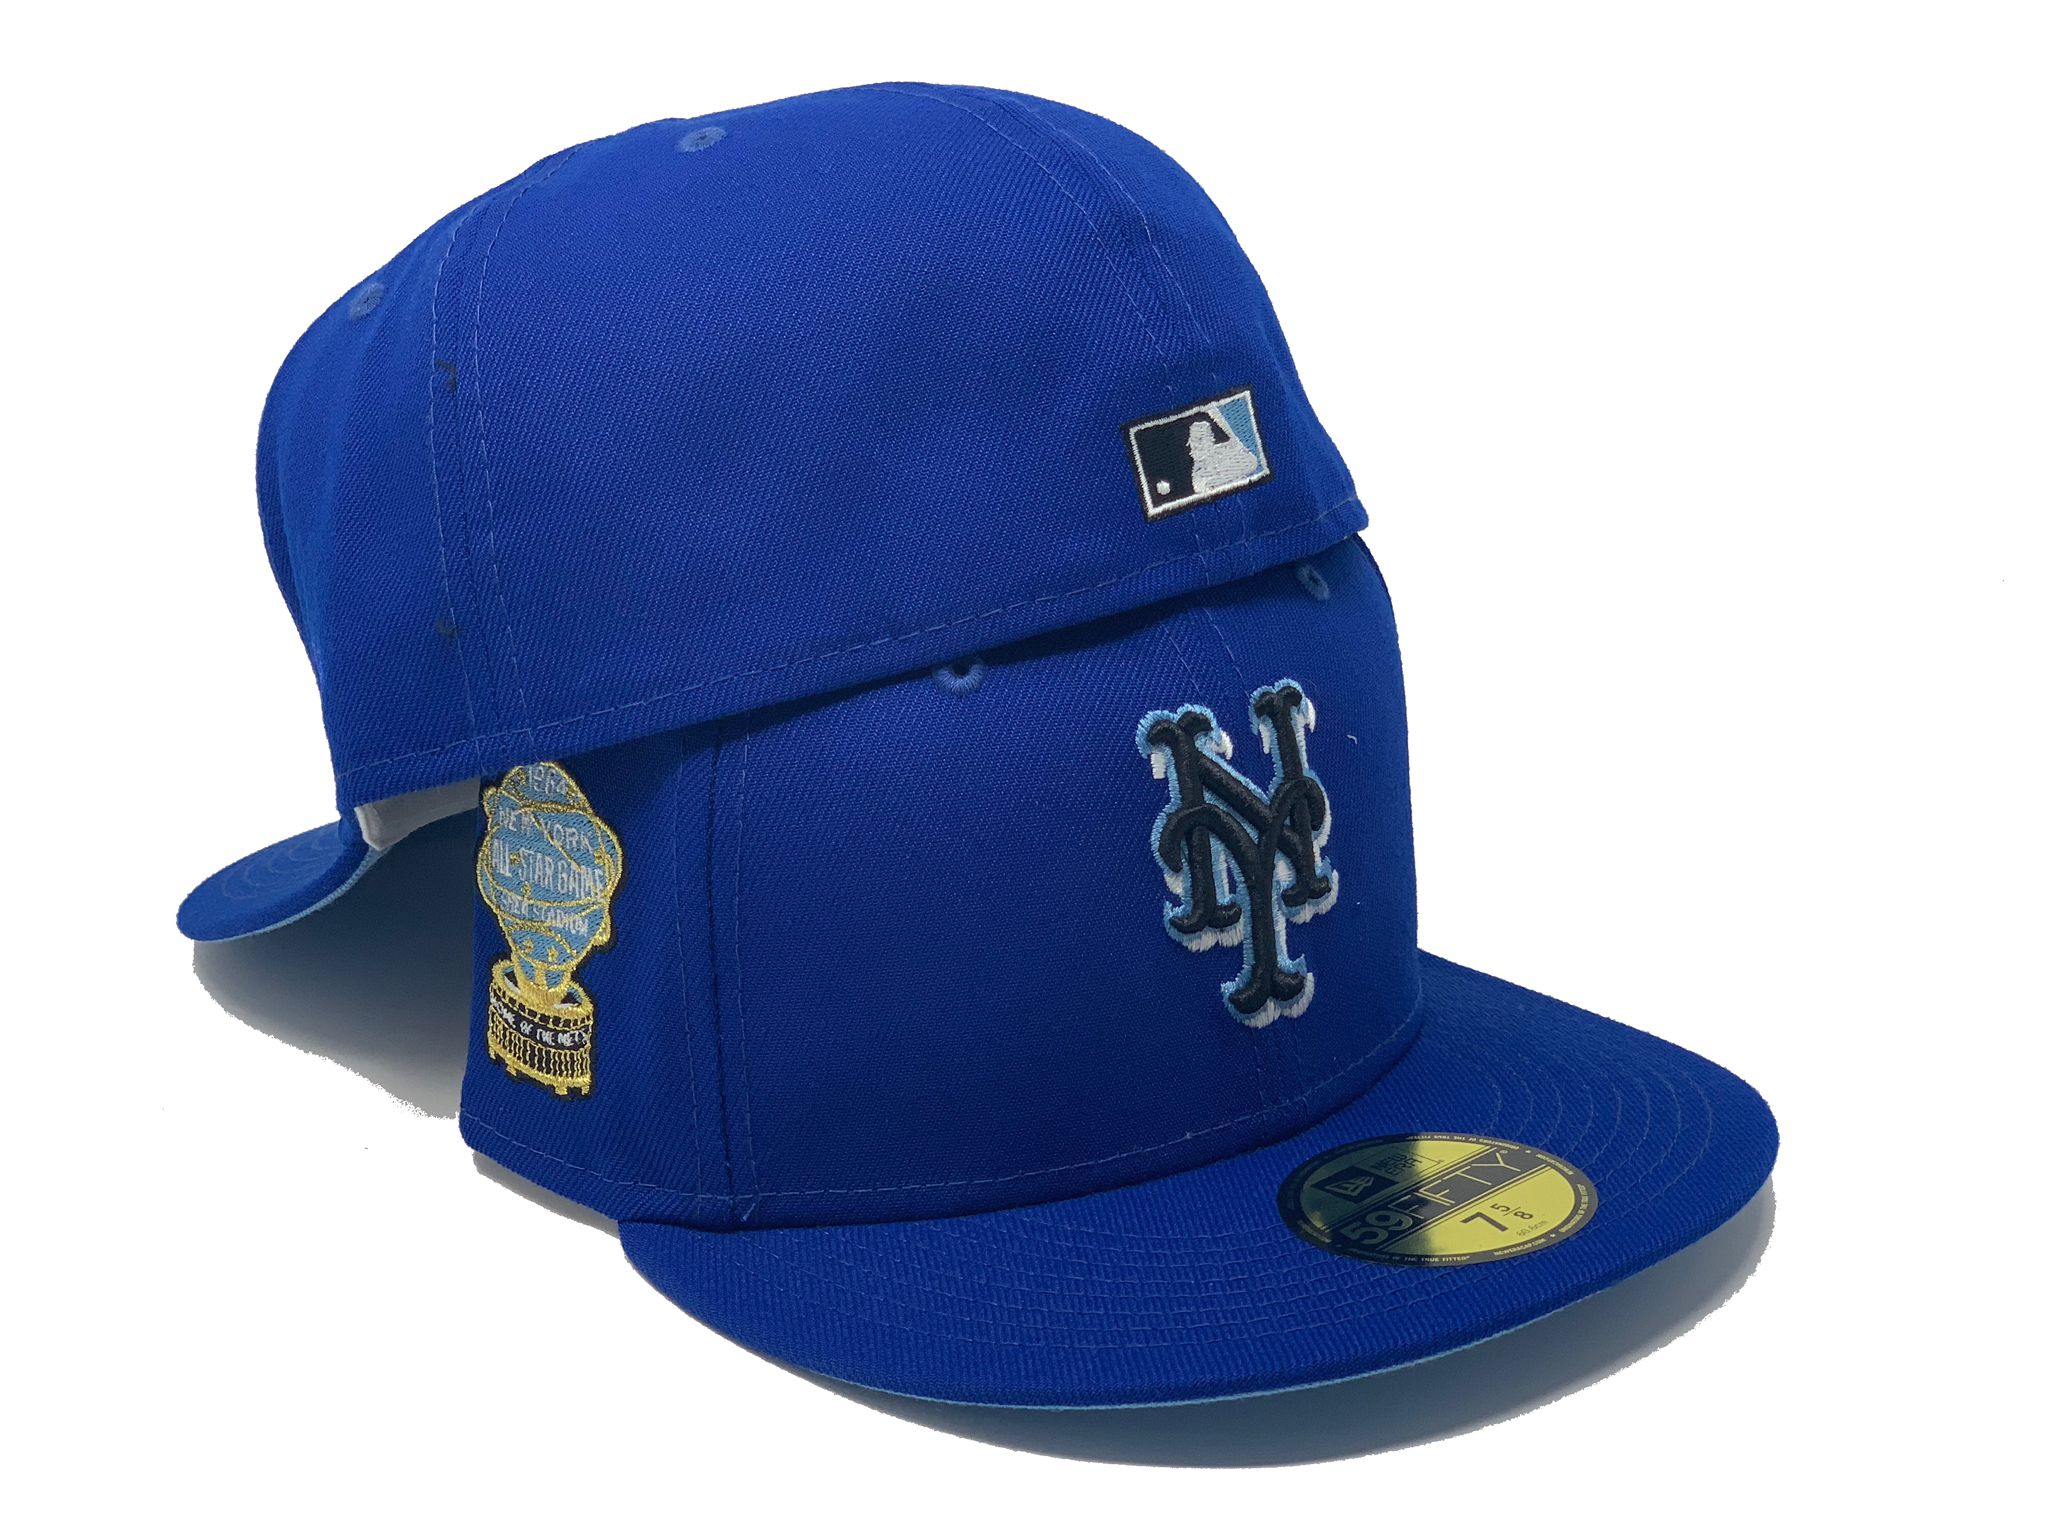 New York Mets New Era Retro 59FIFTY Fitted Hat - Stone/Royal